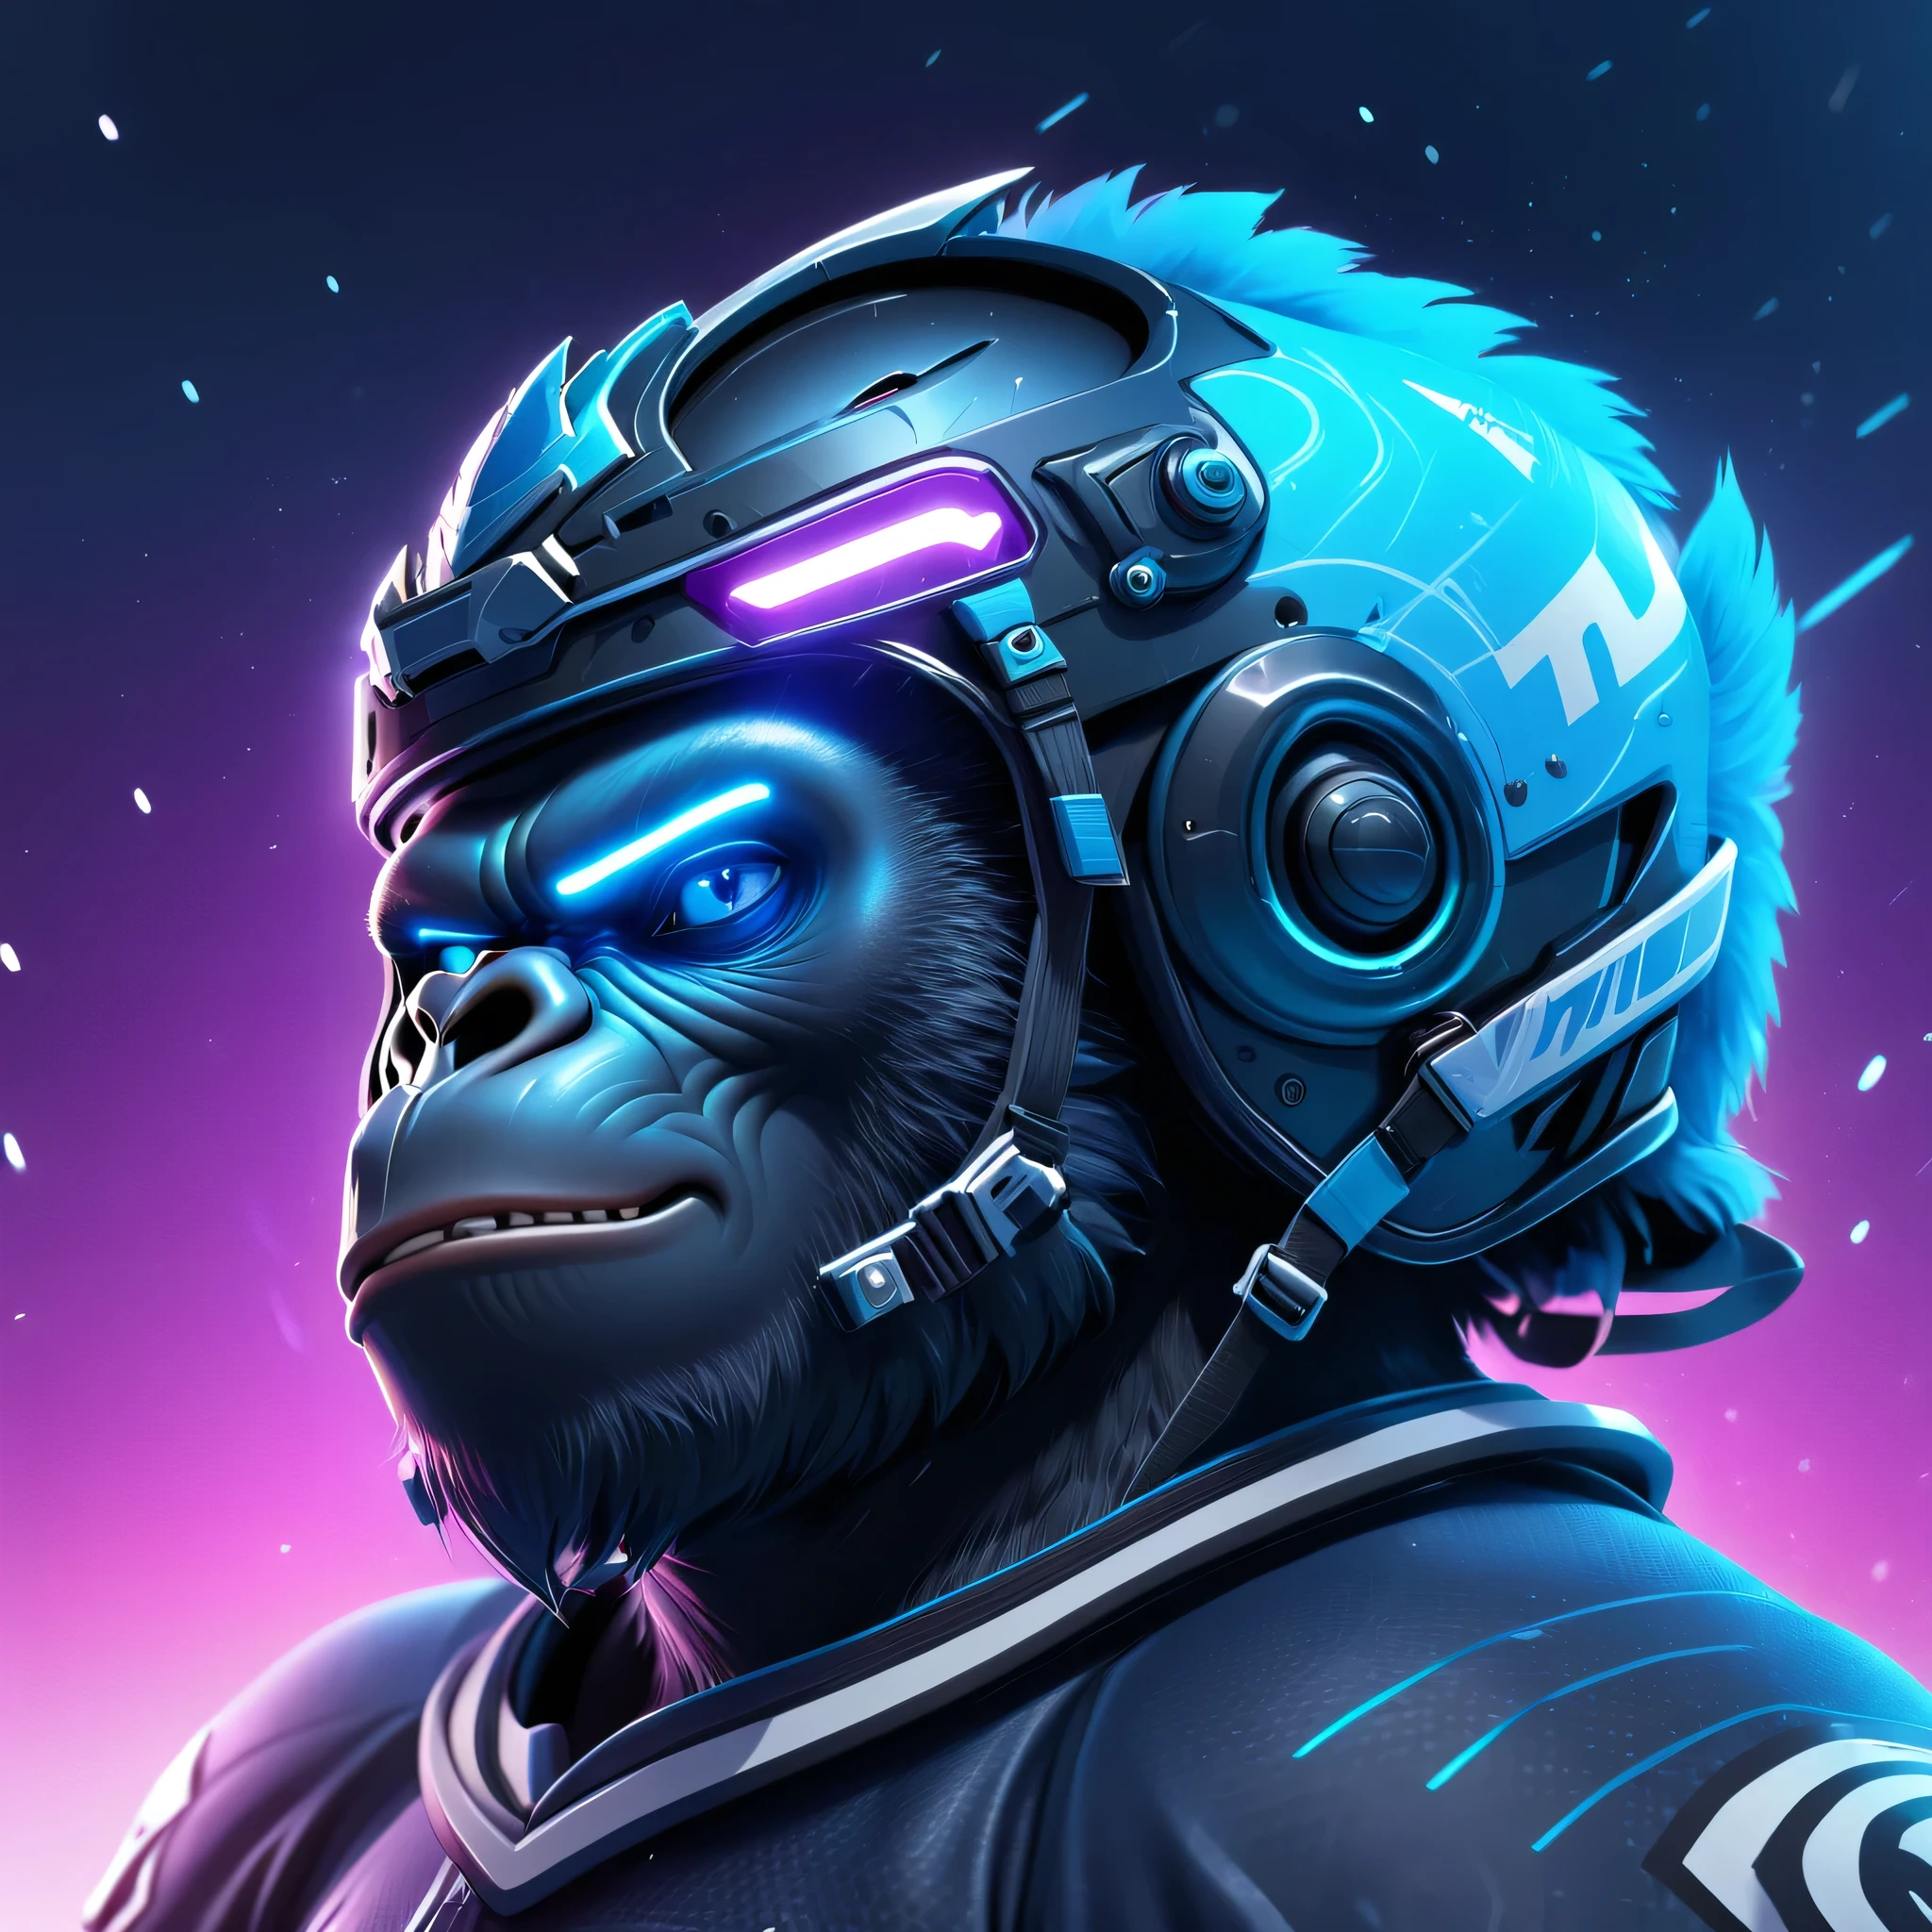 Gorilla playing ice hockey、Glide、３ｄcharacter、Helmet、Cyberspace Showdown、Add motion、armor、Cyber intelligence background、Wear protective gear、Confront、３ｄcharacter、３ｄimage、UHD, anatomically correct, best quality, award winning, 8k, 16k
